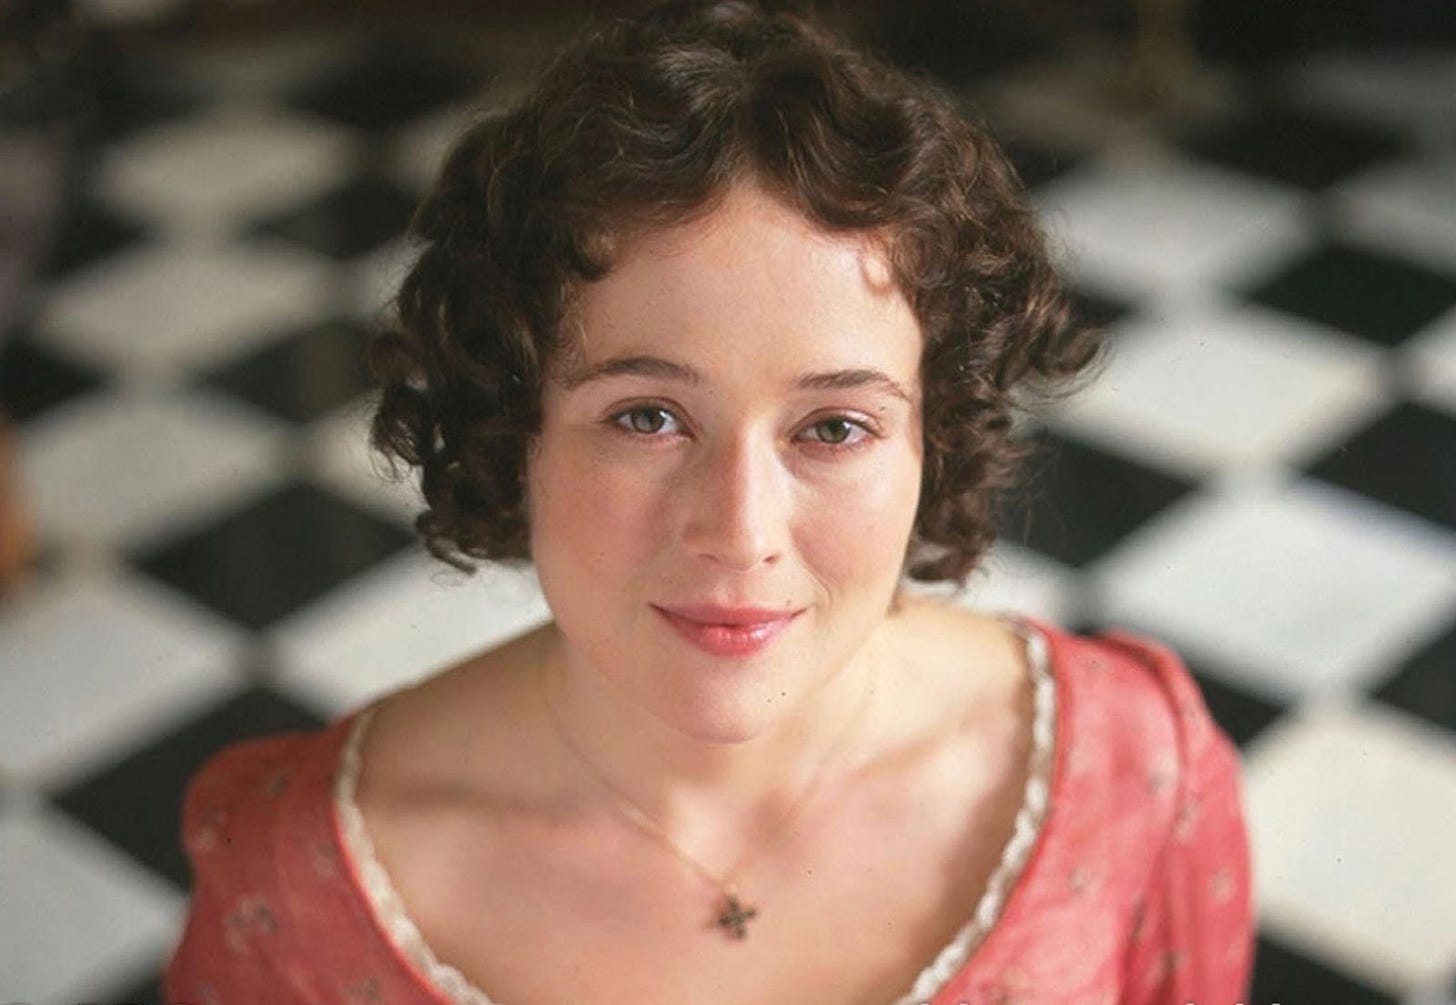 The actor Jennifer Ehle, portraying Elizabeth Bennet, gazes straight up to the camera. She wears a mauve Regency gown with white lace trim and a necklace, and a bemused but serene expression. In the background is a black and white checked floor pattern. 